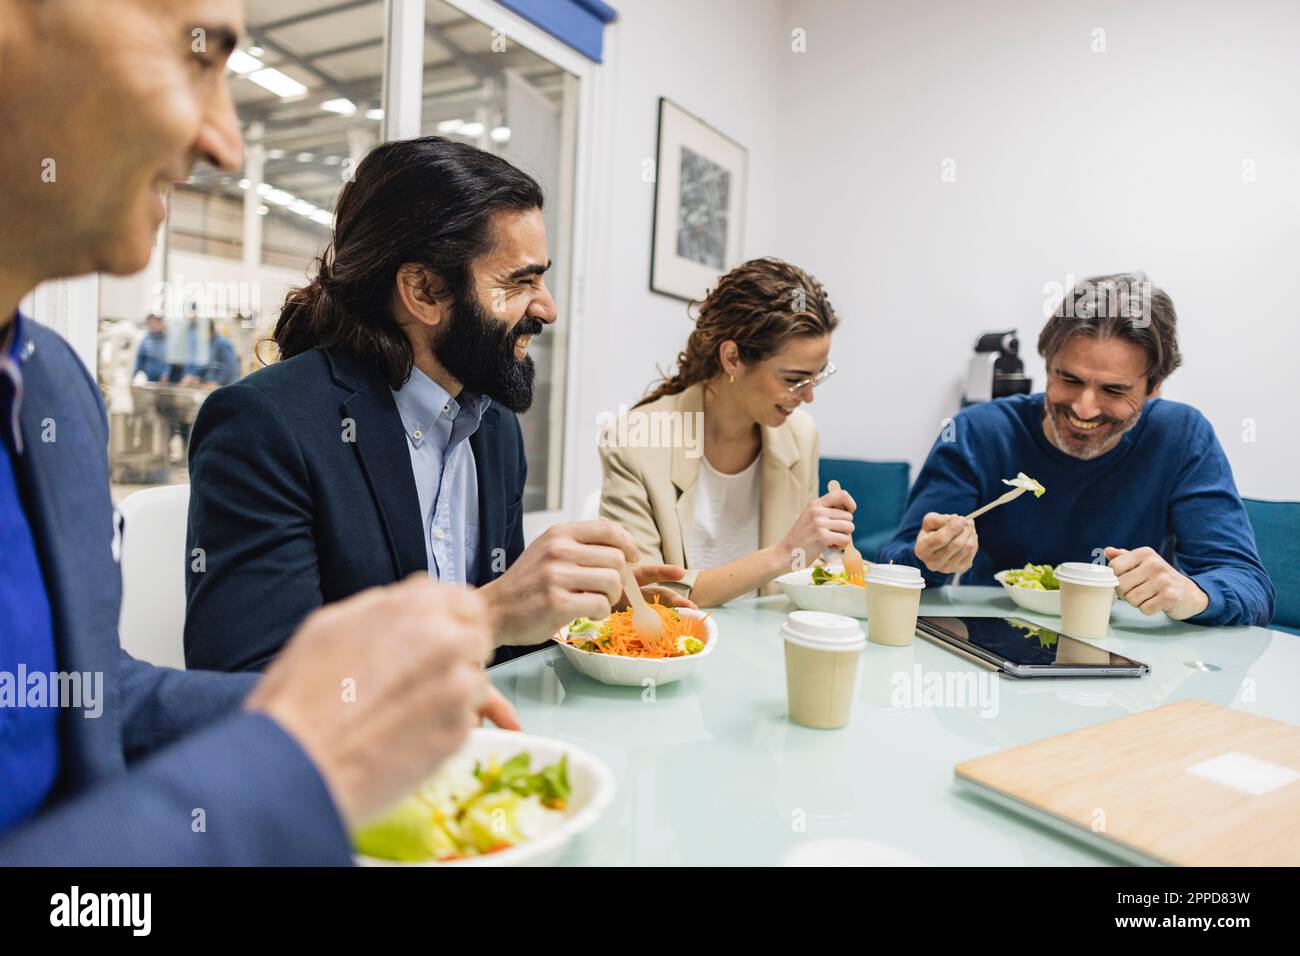 Happy colleagues having meal together at desk Stock Photo